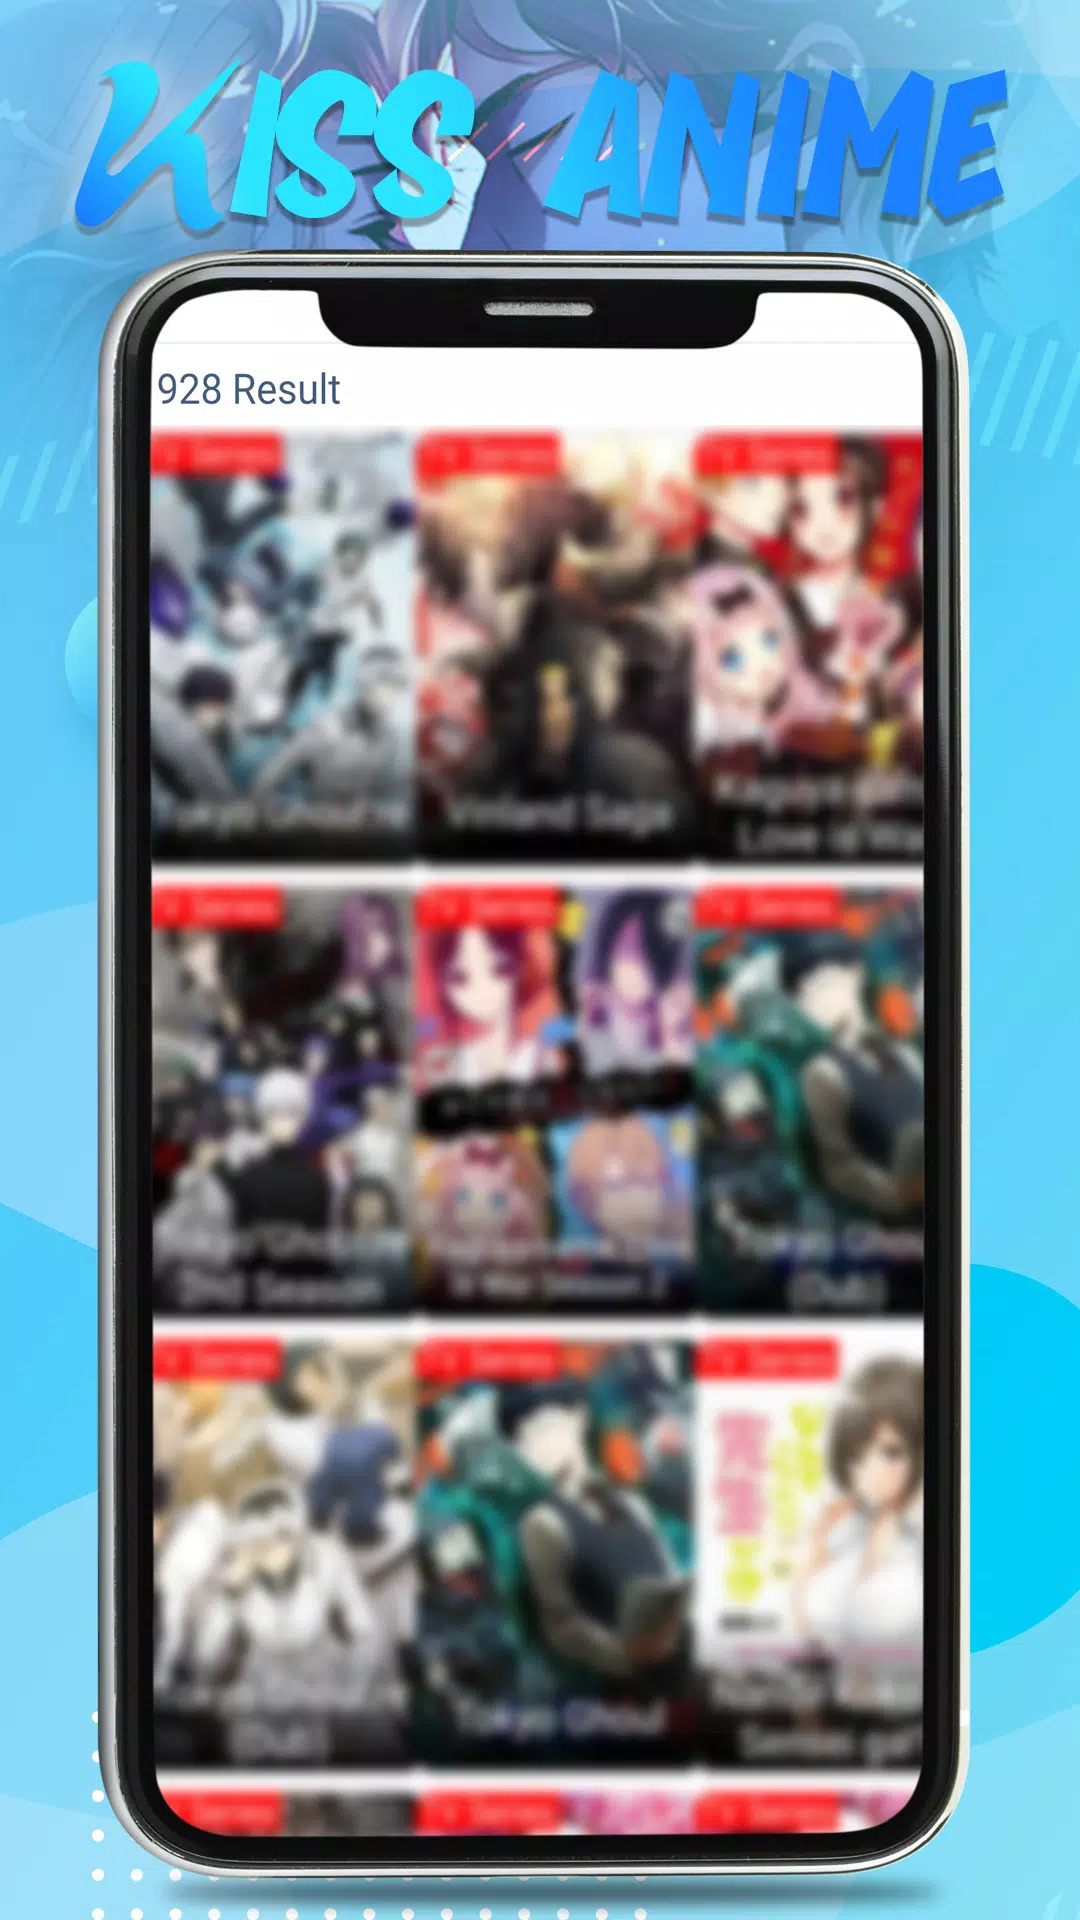 Watch Anime Online Tv - kiss Anime & Manga APK voor Android Download